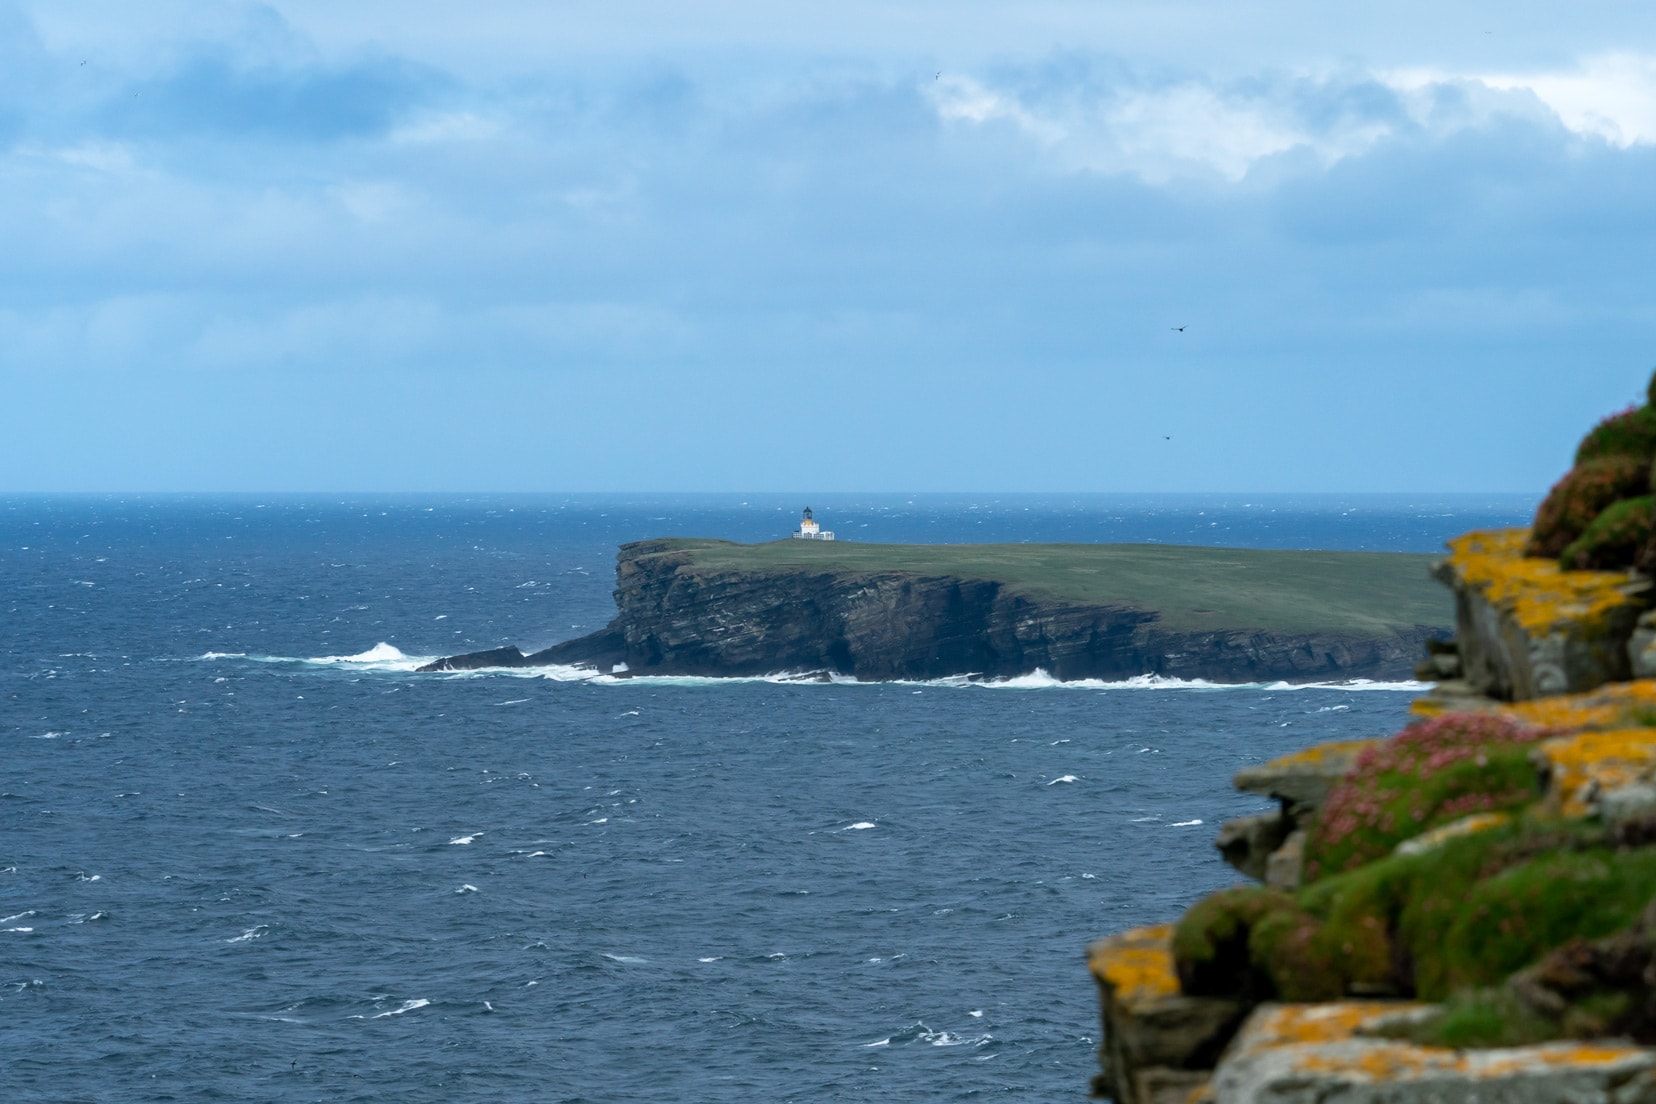 Brough of Birsay view from Marwick Head - a small island with a lighthouse on the top